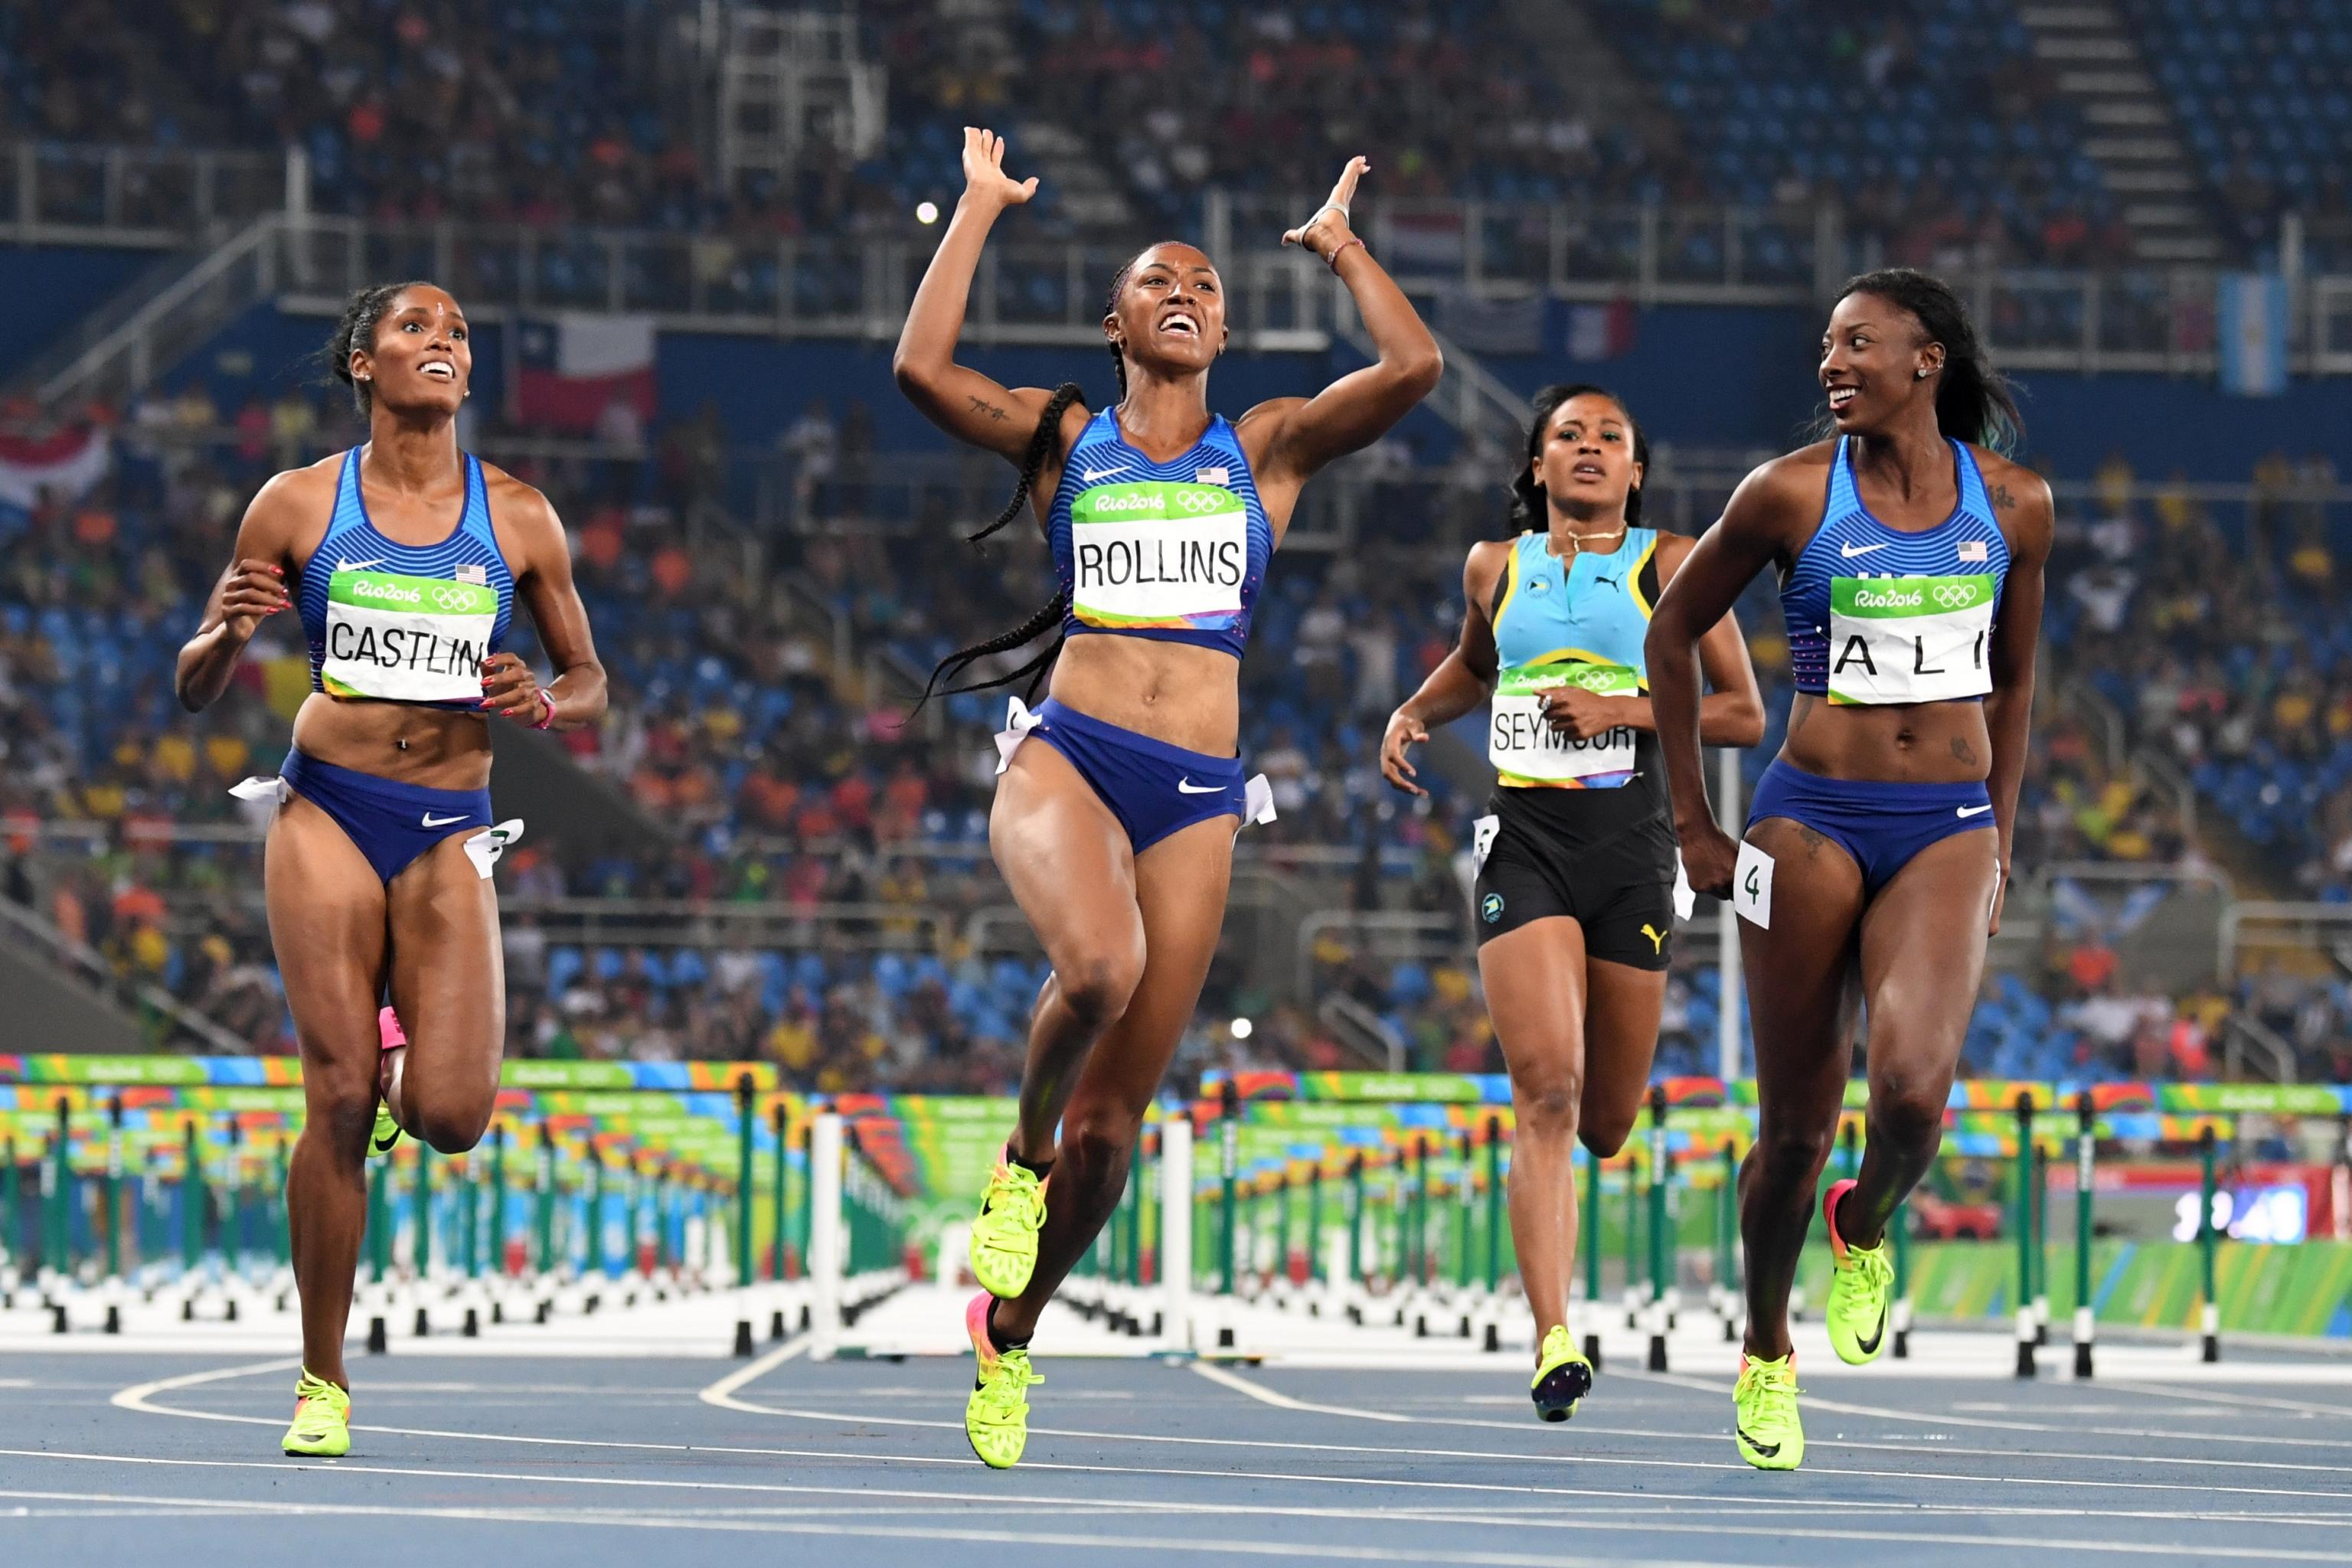 Olympic Track And Field 16 Women S 100m Hurdles Winners Times And Results Bleacher Report Latest News Videos And Highlights